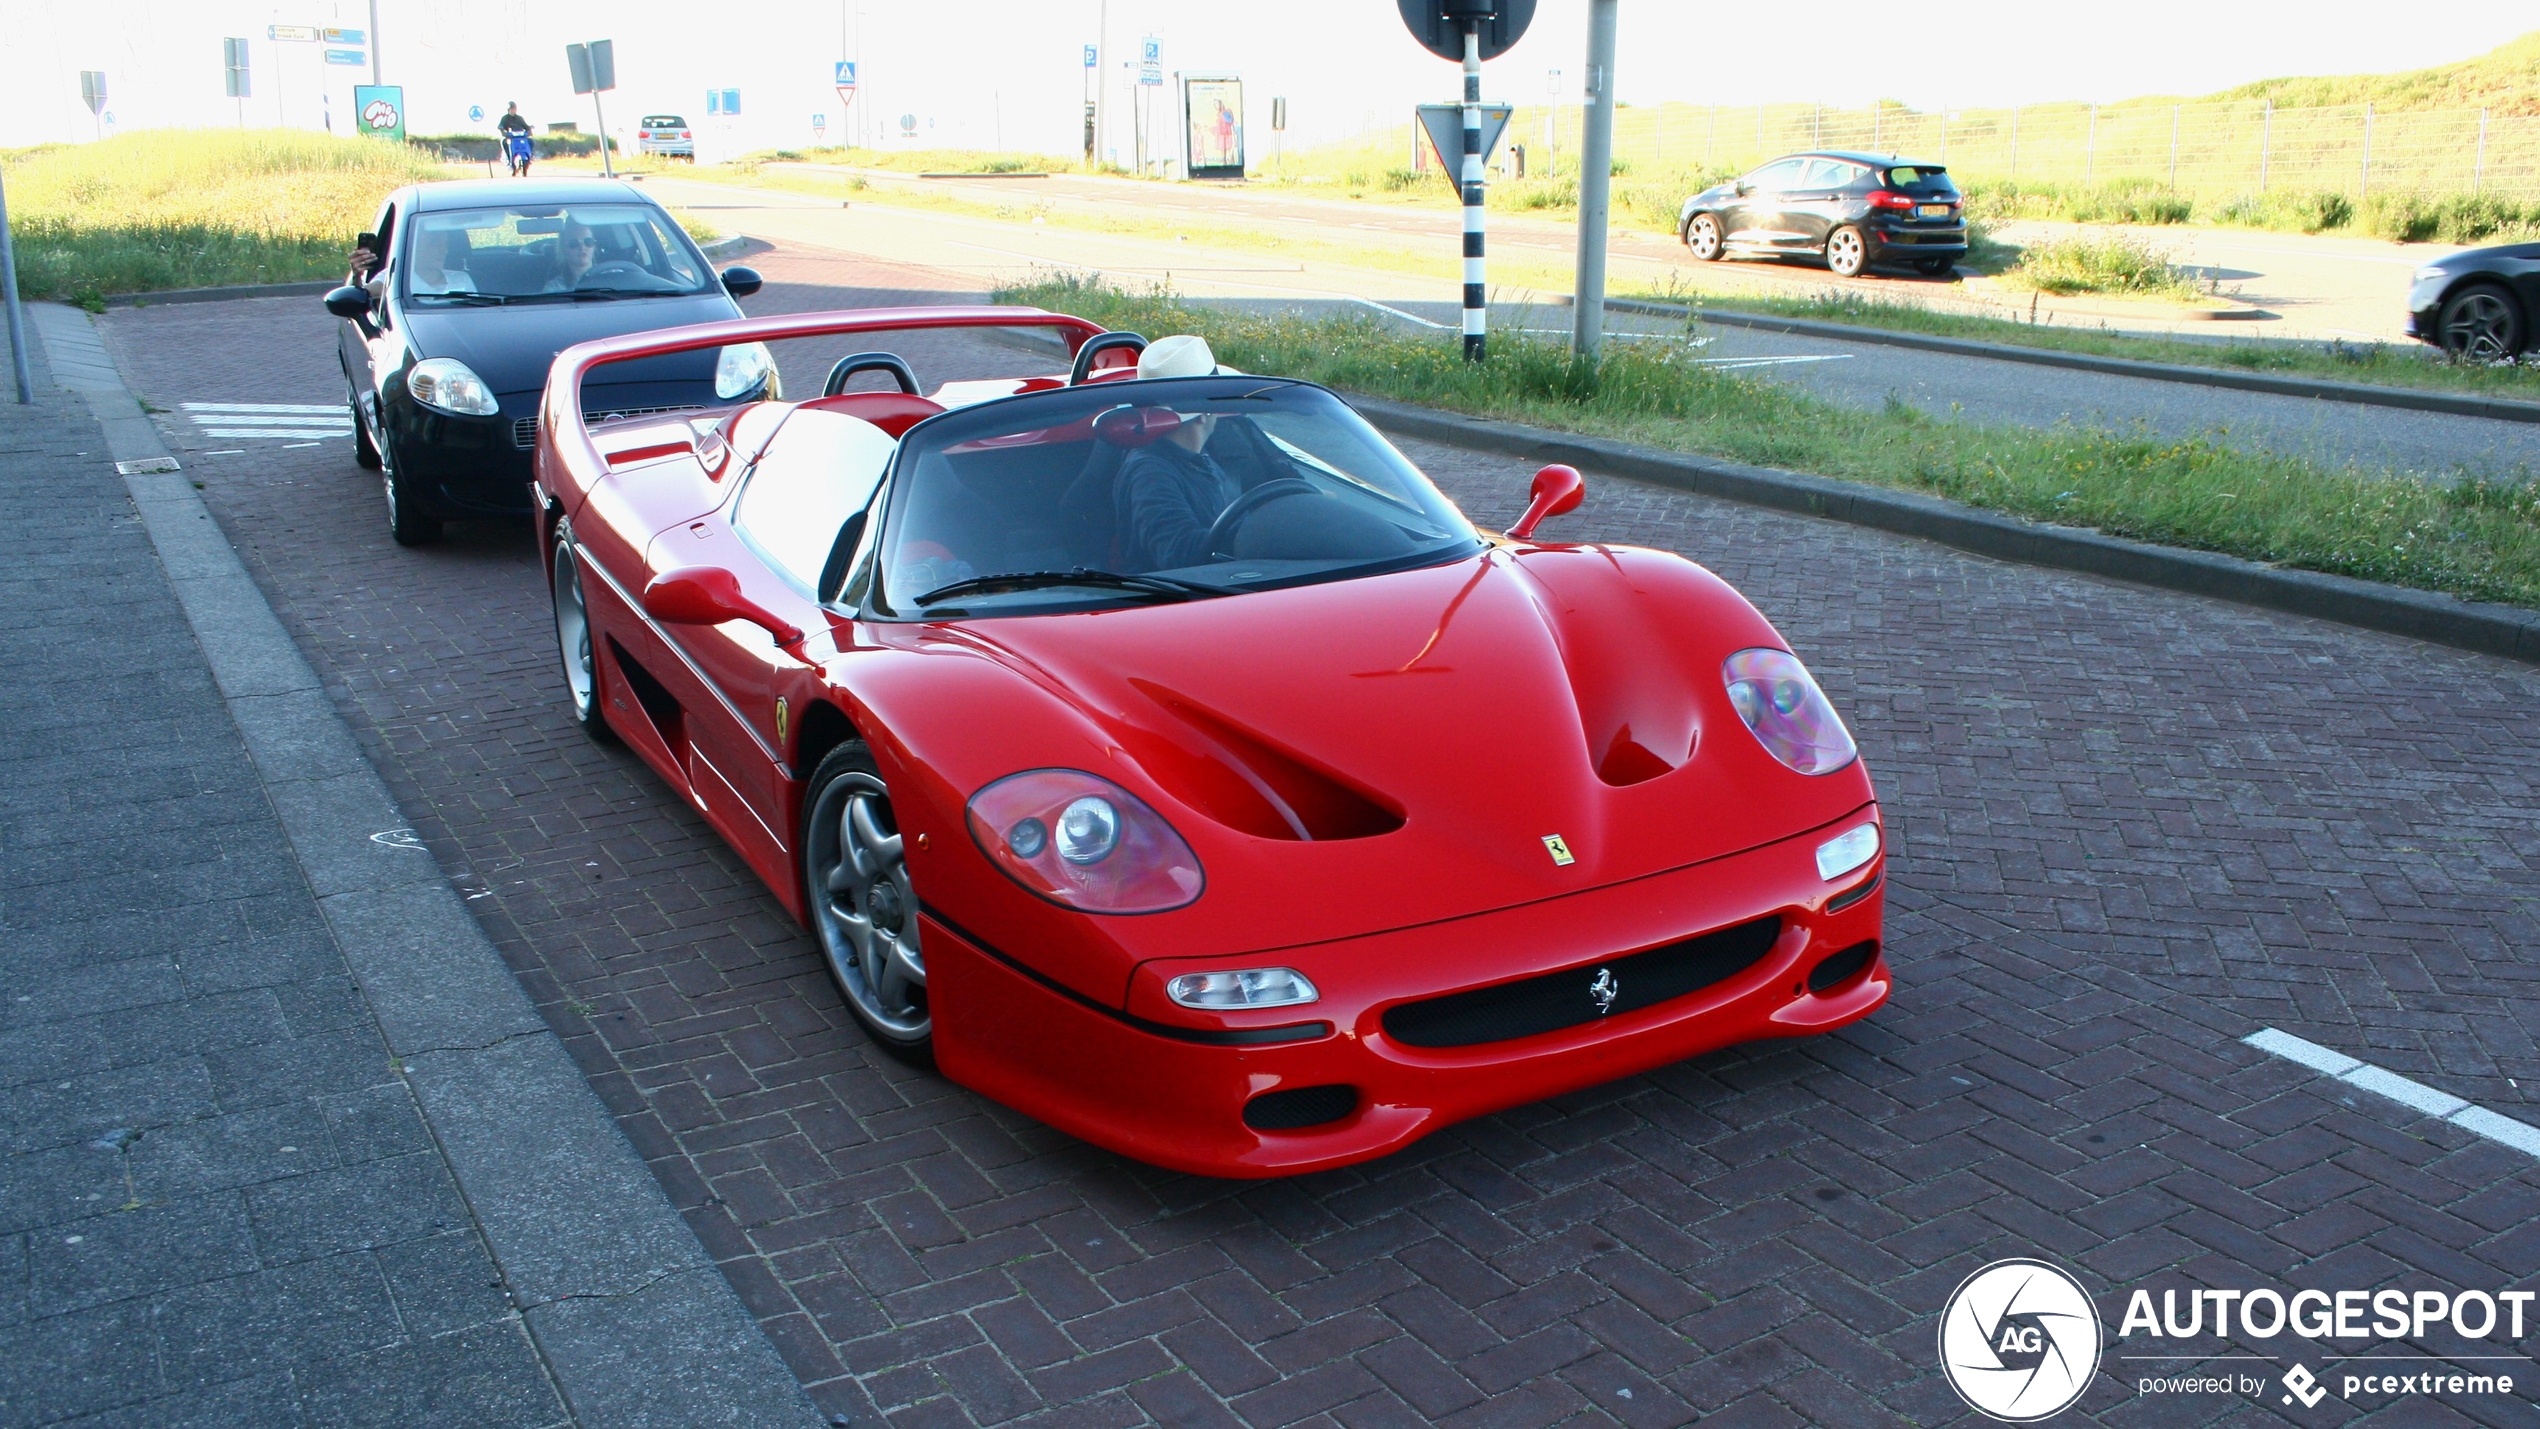 This F50 is a worthy anniversary spot